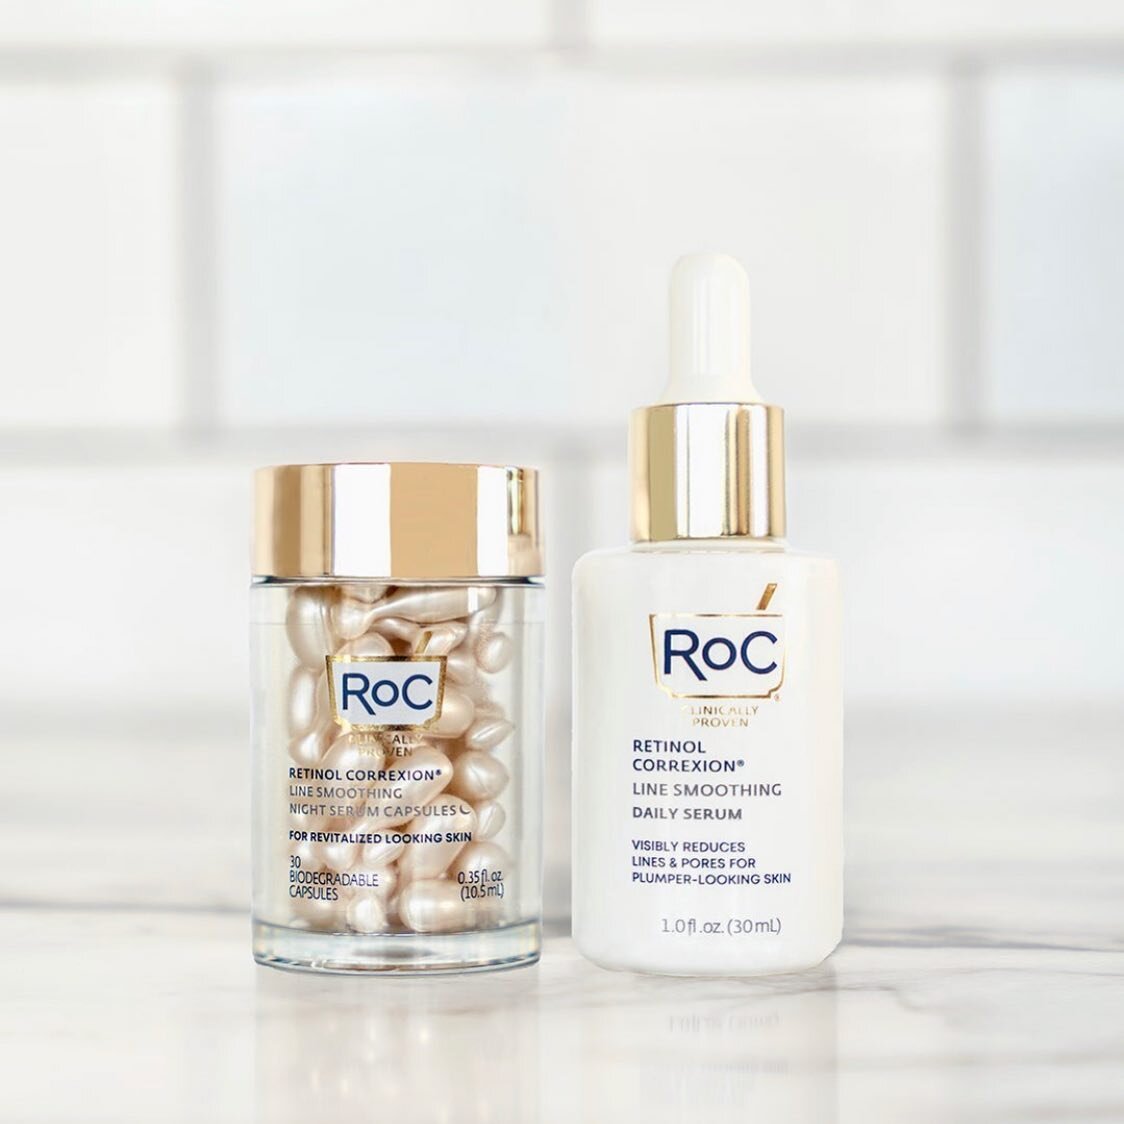 Introducing... your line-smoothing skin superheroes! 🦸&zwj;♀️

☀️ AM: use the retinol correxion line smoothing daily serum

🌙 PM: use the retinol correxion line smoothing night serum capsules

After using this dreamy duo for 4 weeks ~ skin will app